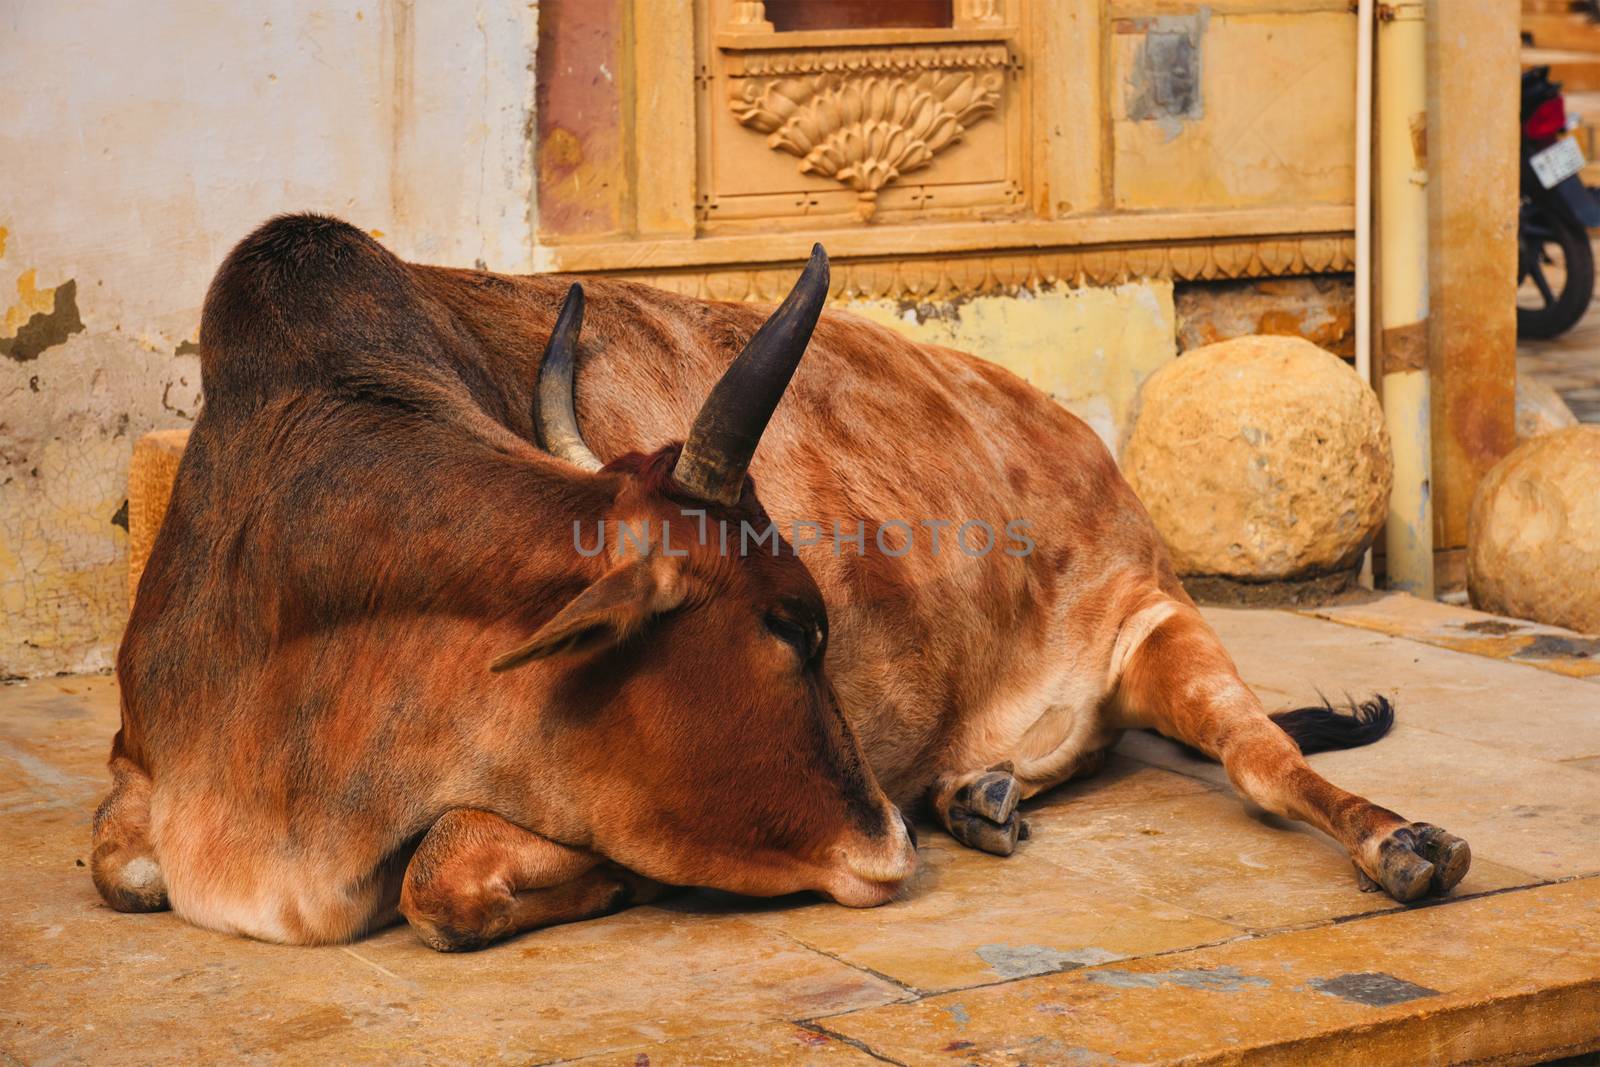 Indian cow resting sleeping in the street. Cow is a sacred animal in India. Jasialmer fort, Rajasthan, India